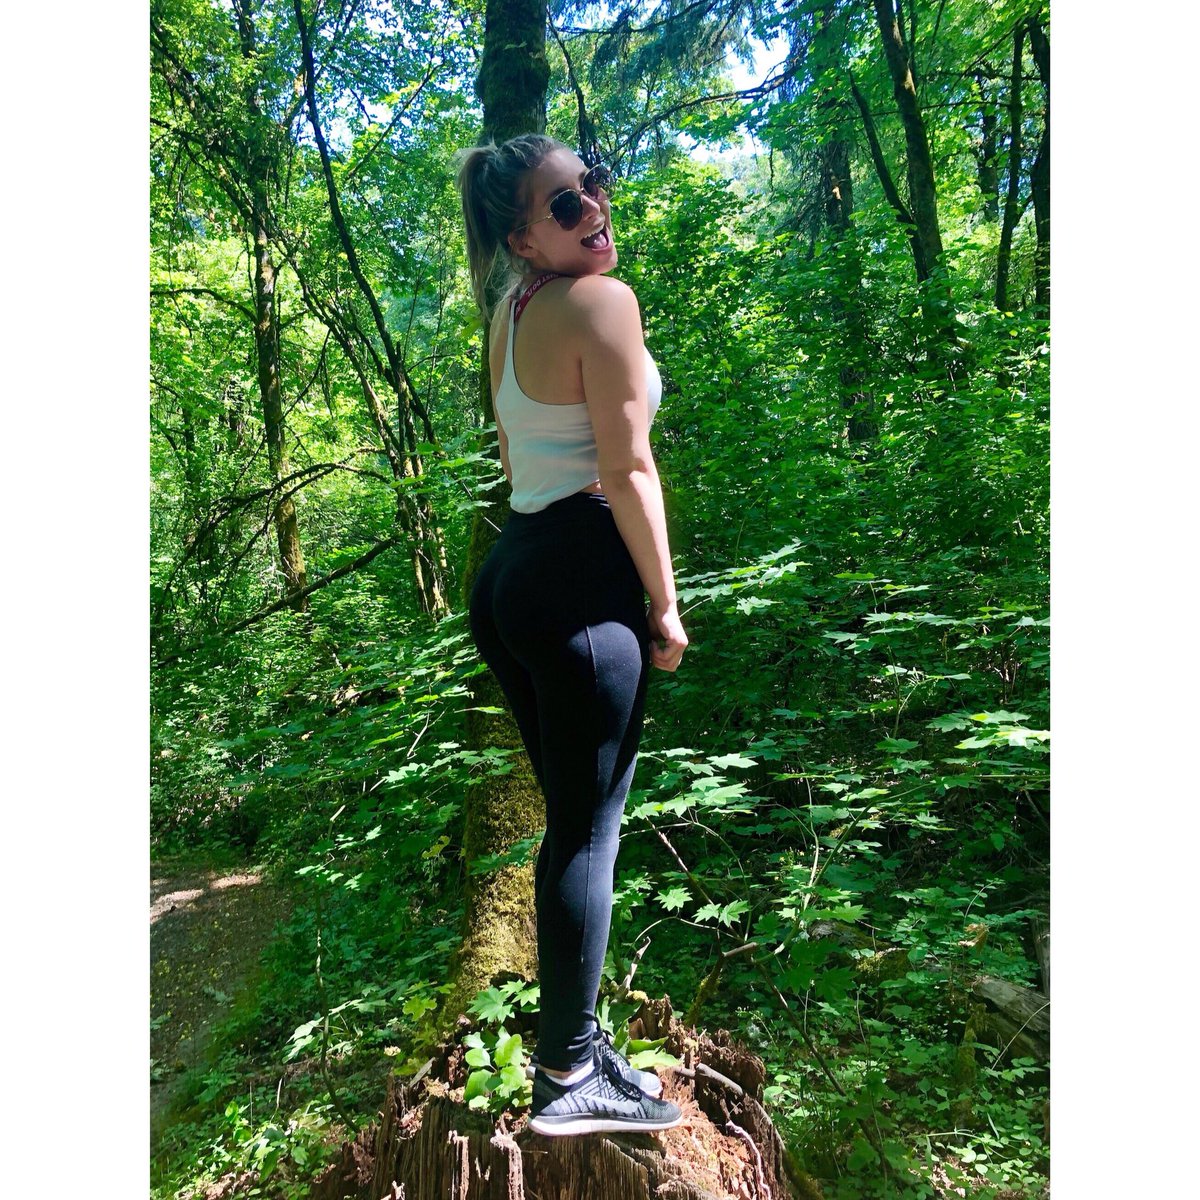 Right after this picture was taken I jumped off the stump and fell on my ass, but #natureiscool